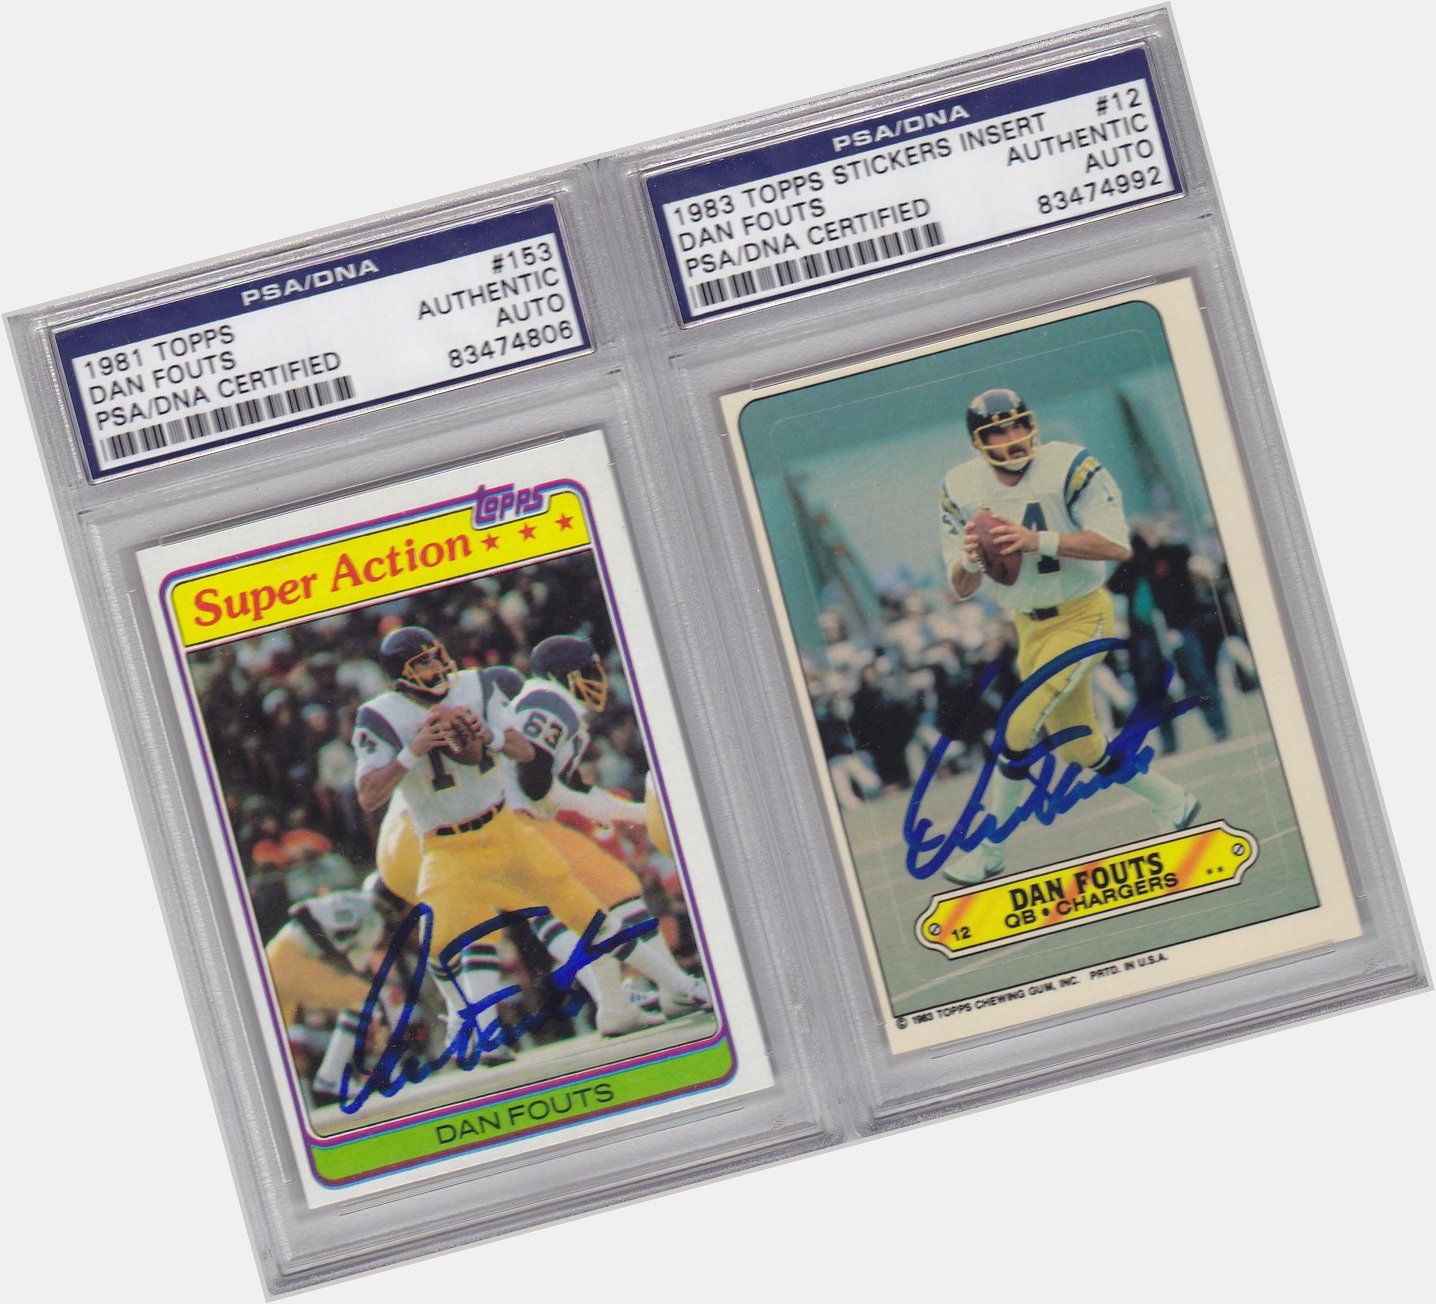 Happy 64th bday to member former QB Dan Fouts - signed these for me a few months ago 